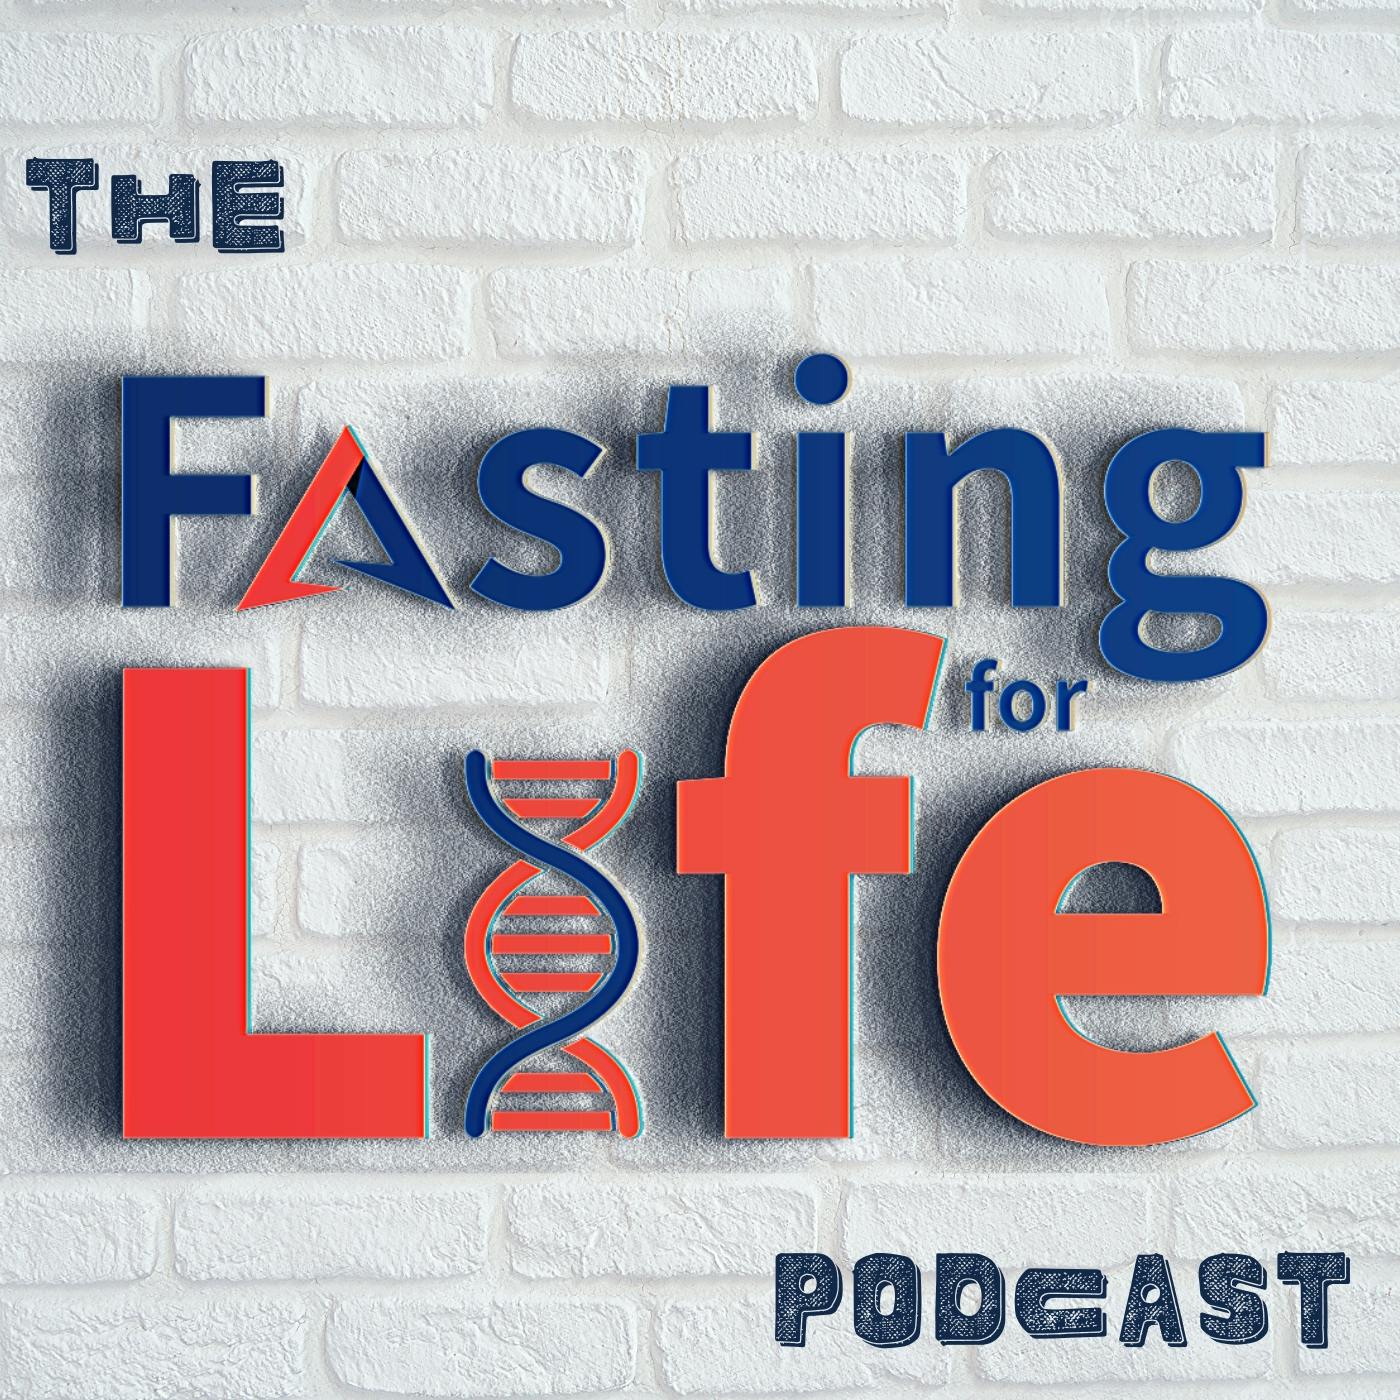 Ep. 5 - Fasting History, Testimonials, The Fasting Cure, Dr. Jason Fung | Bloodwork, Body Composition, Fasting Risks & Fears | Guided Fasting Challenge, Fasting Coaching, Free Intermittent Fasting Pla